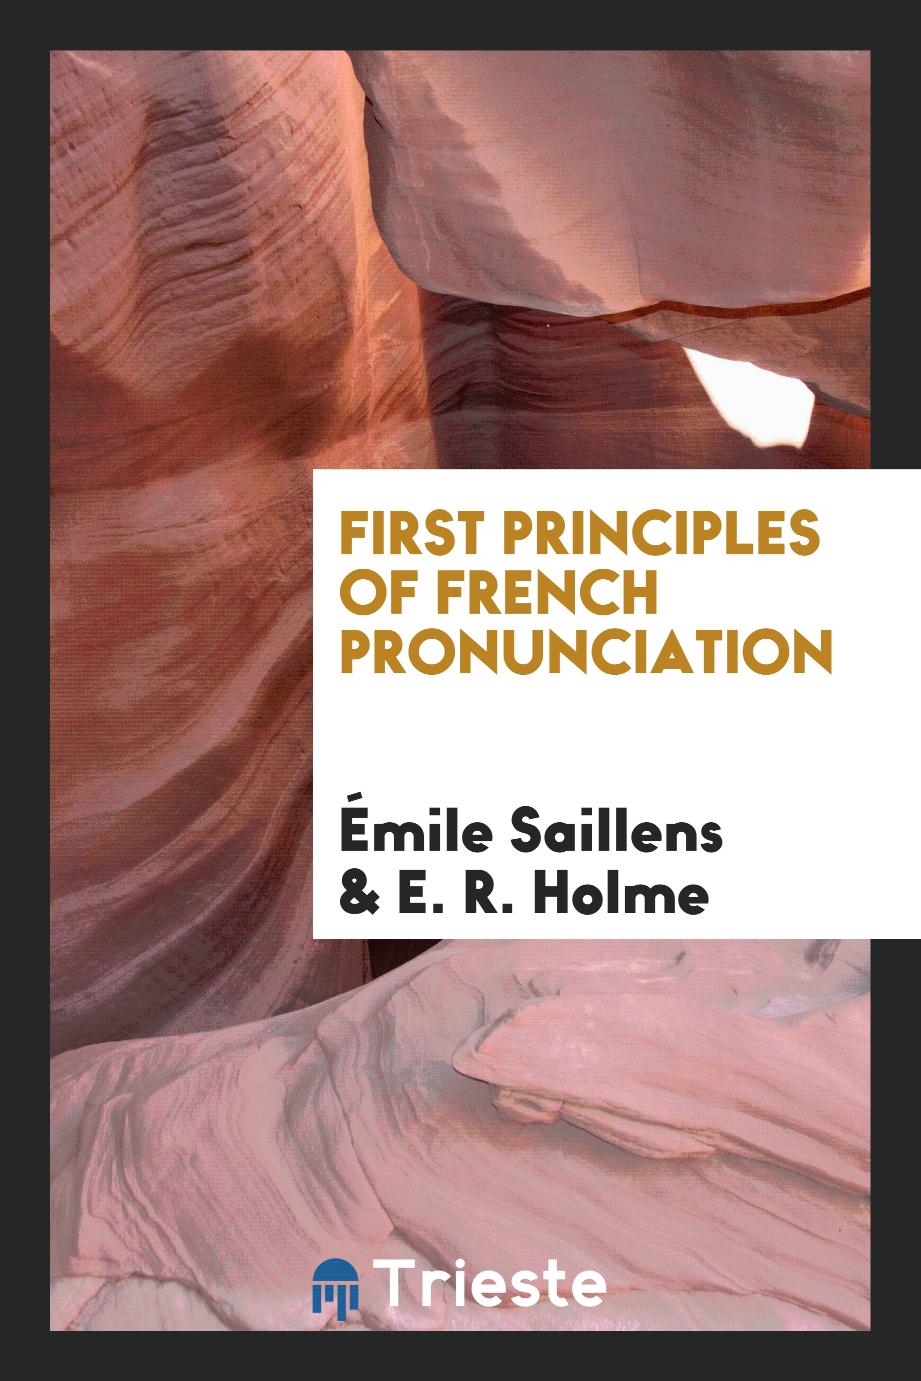 First principles of French pronunciation